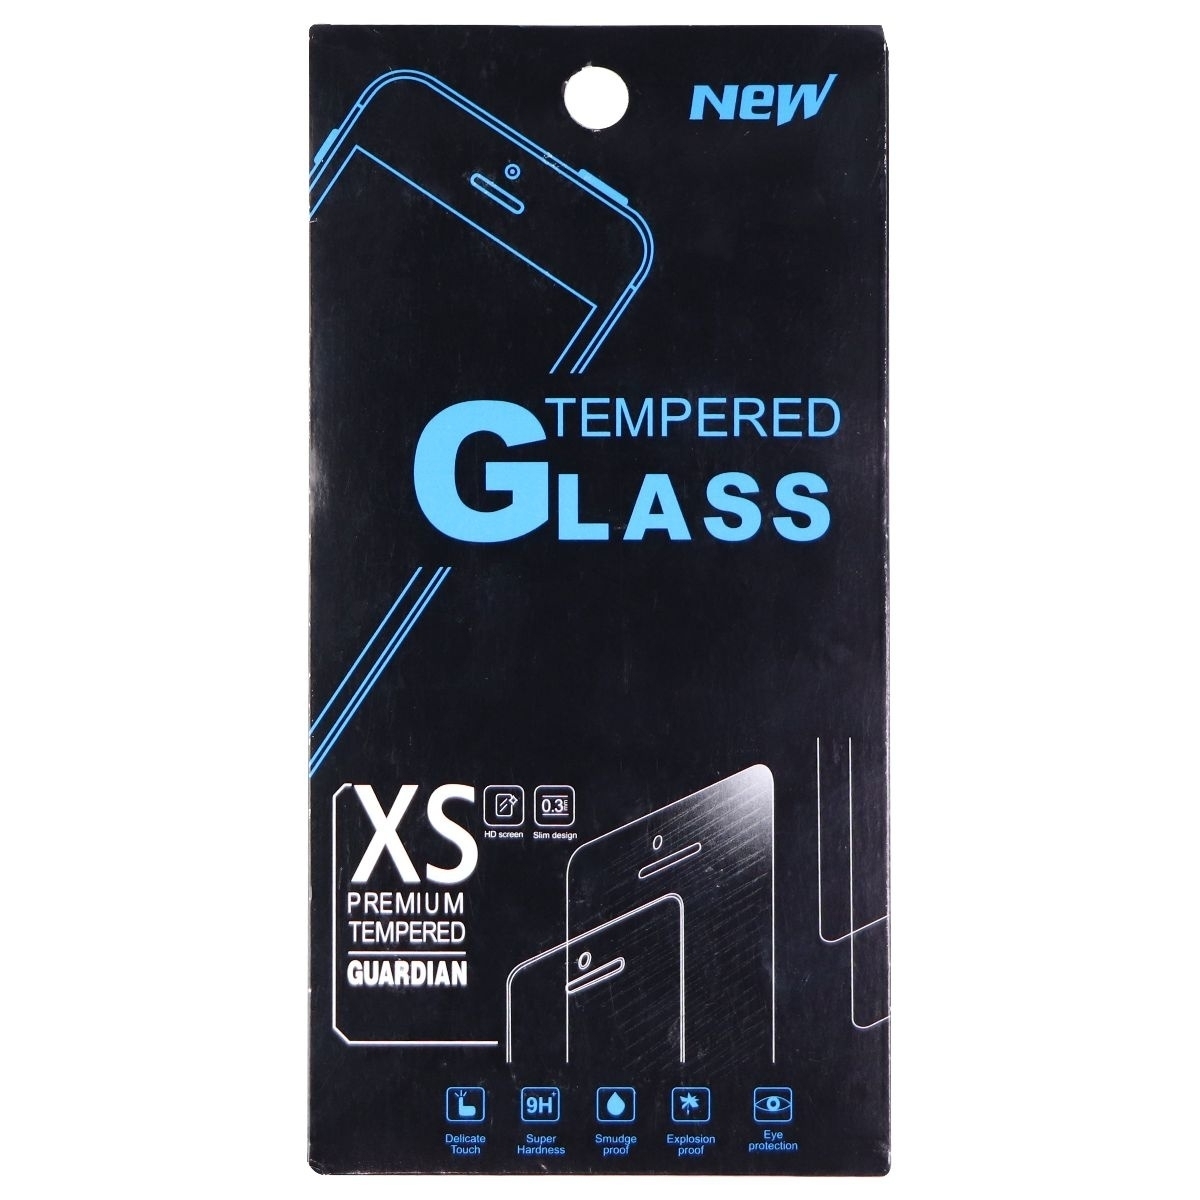 Premium Tempered Glass Screen Protector For Motorola G6 Play - Clear